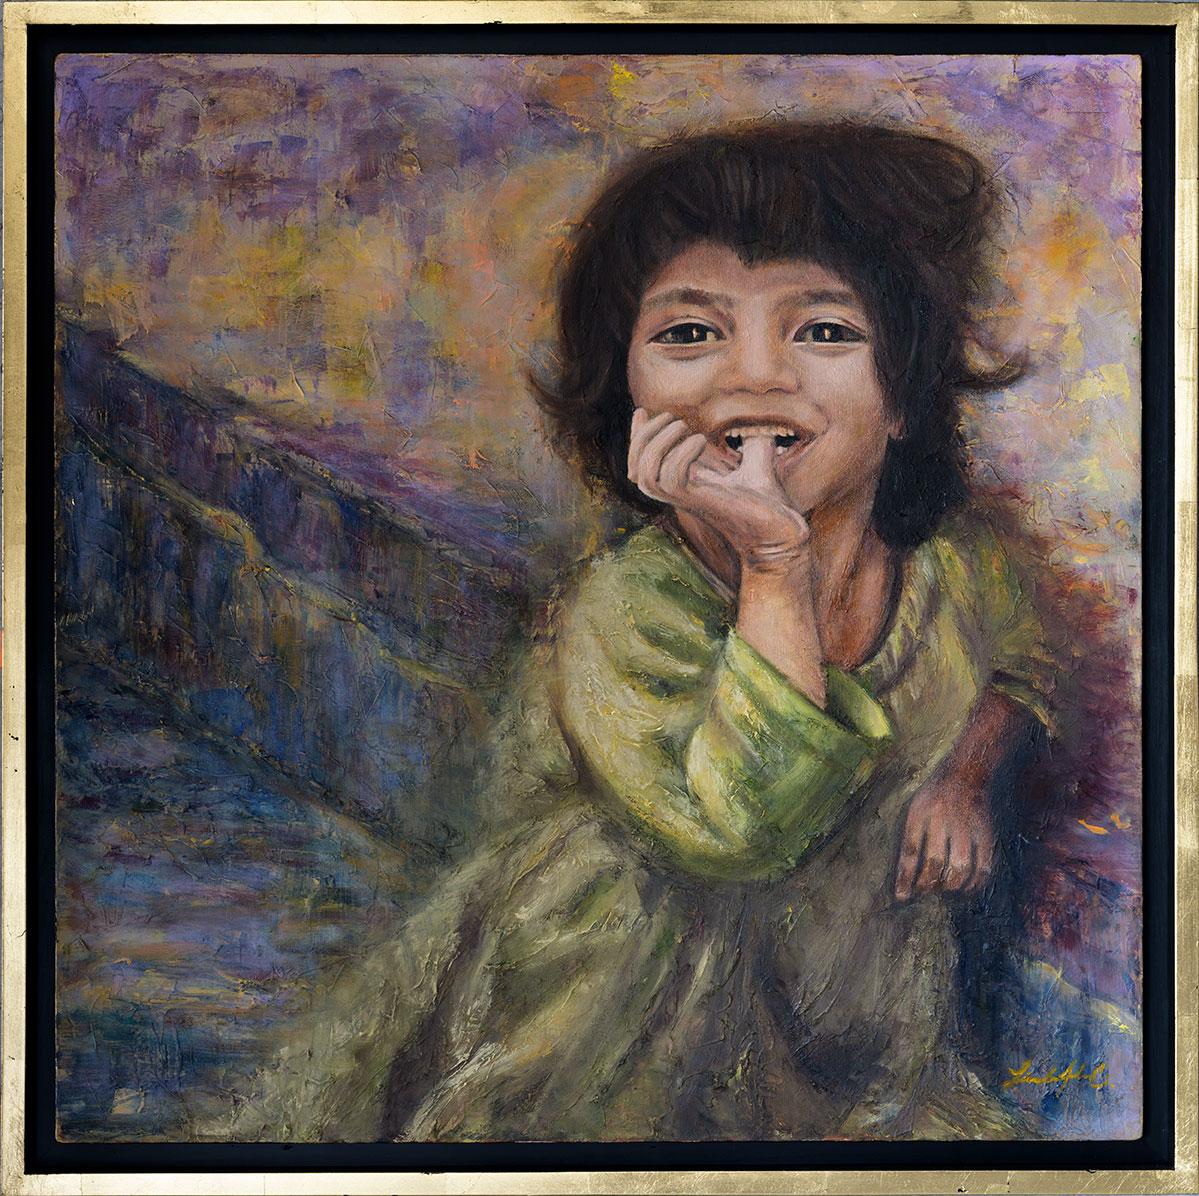 Happiness has no zip code - Painting by Linda Achar Cohen